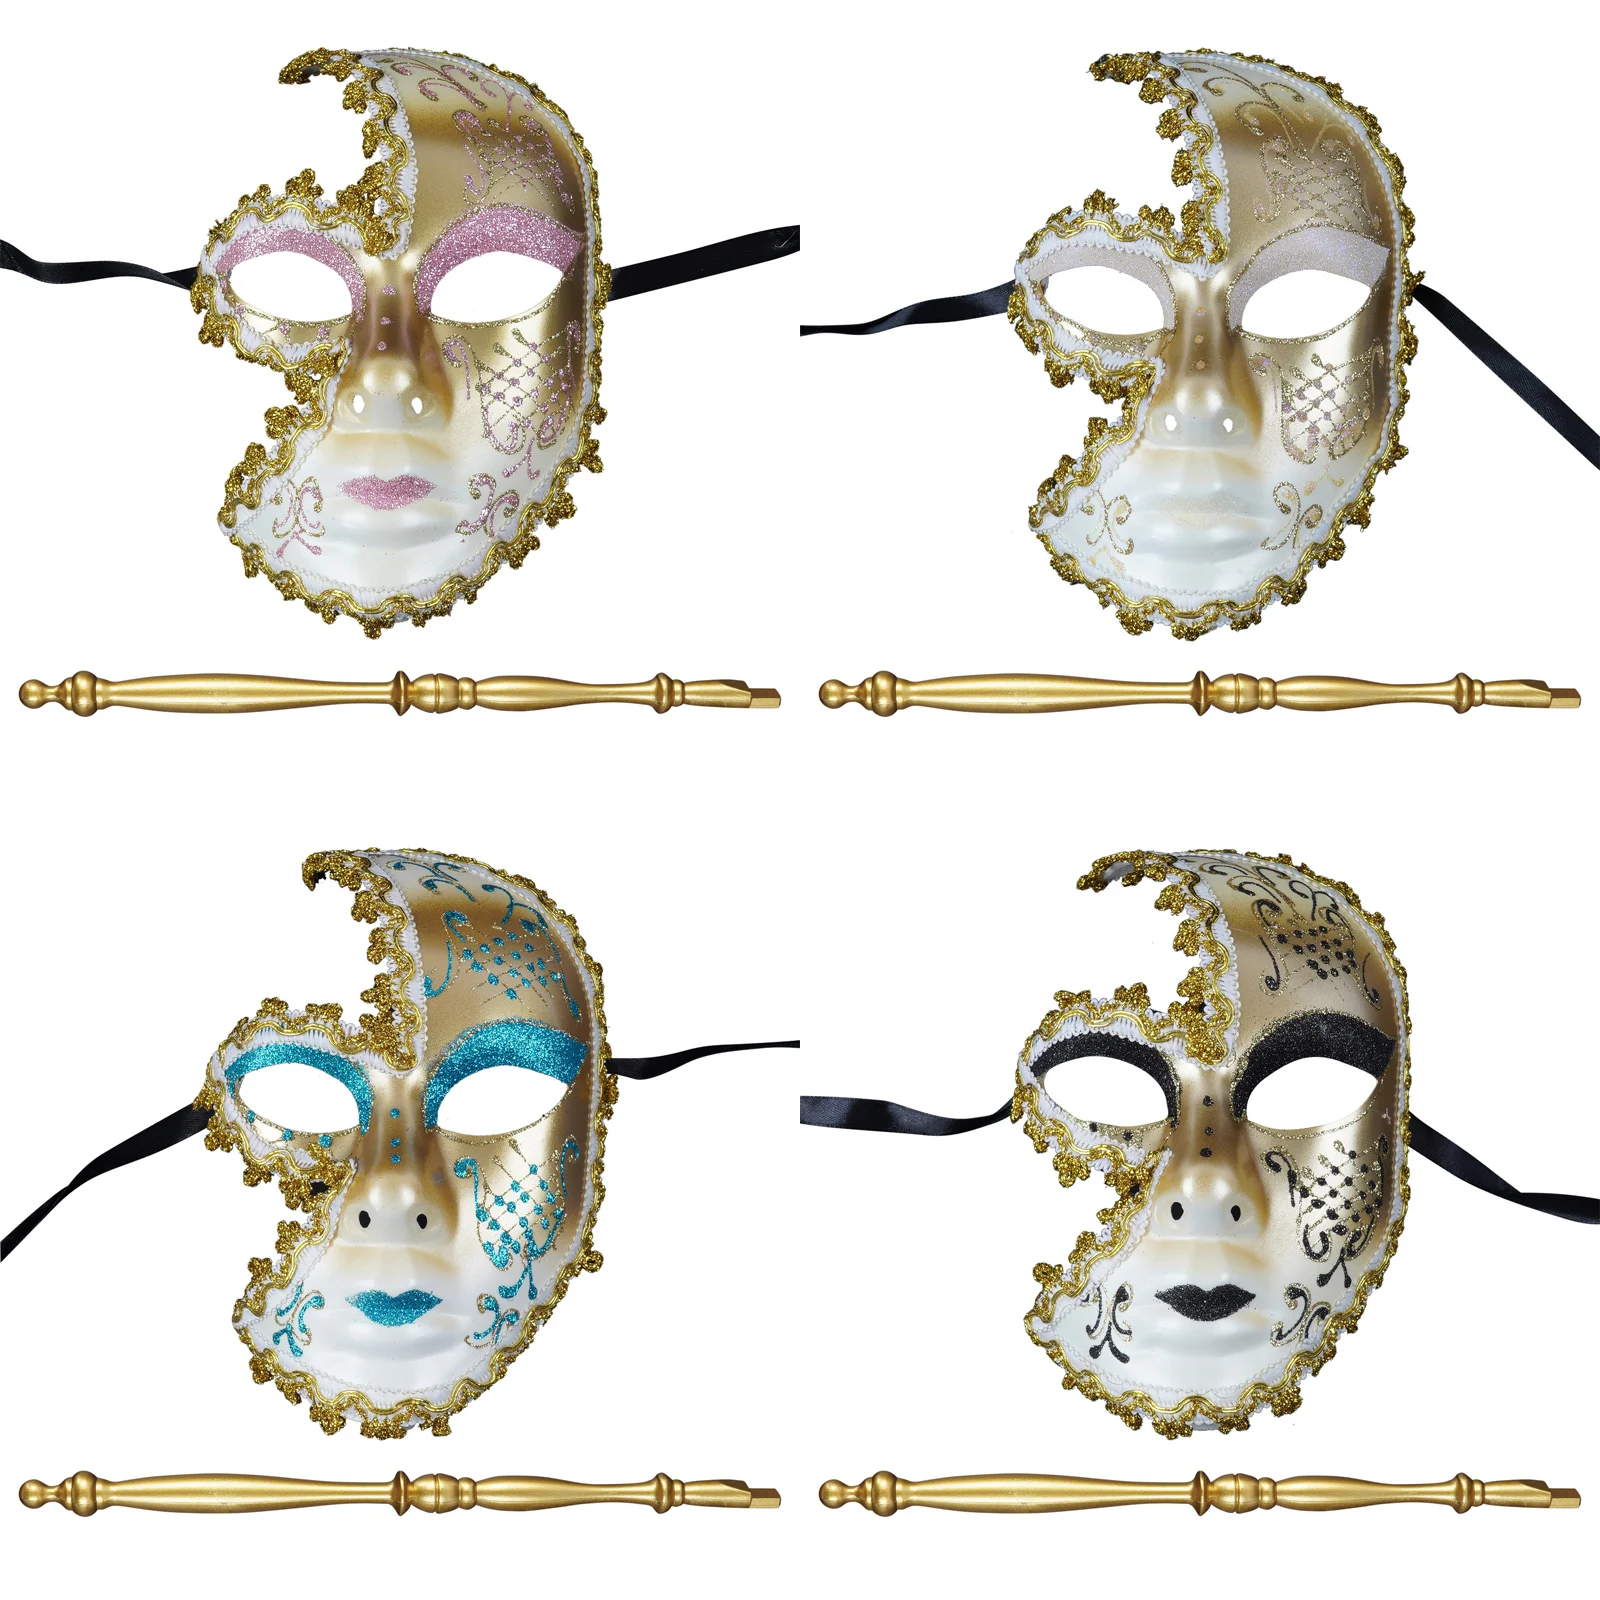 Details about   New Venetian Masquerade Eye Mask Mardi Gras Prom Costume Cosplay Masks 